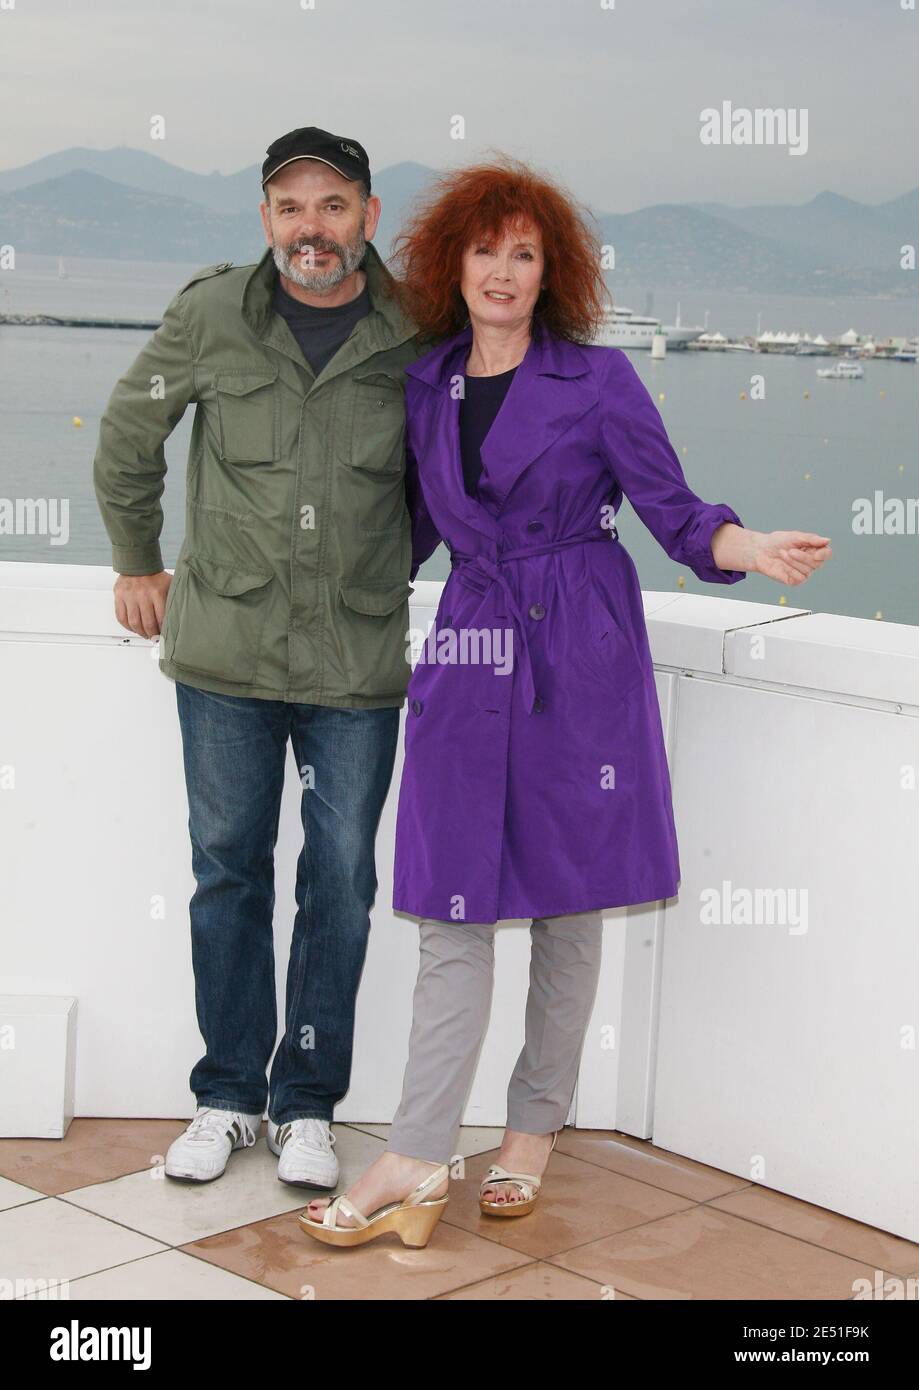 Cast members Sabine Azema and Jean-Pierre Darroussin pose at a photocall for their latest movie 'Le voyage aux Pyrenees' during the 61st Cannes Film Festival in Cannes, France on May 16, 2008. Photo by Denis Guignebourg/ABACAPRESS.COM Stock Photo